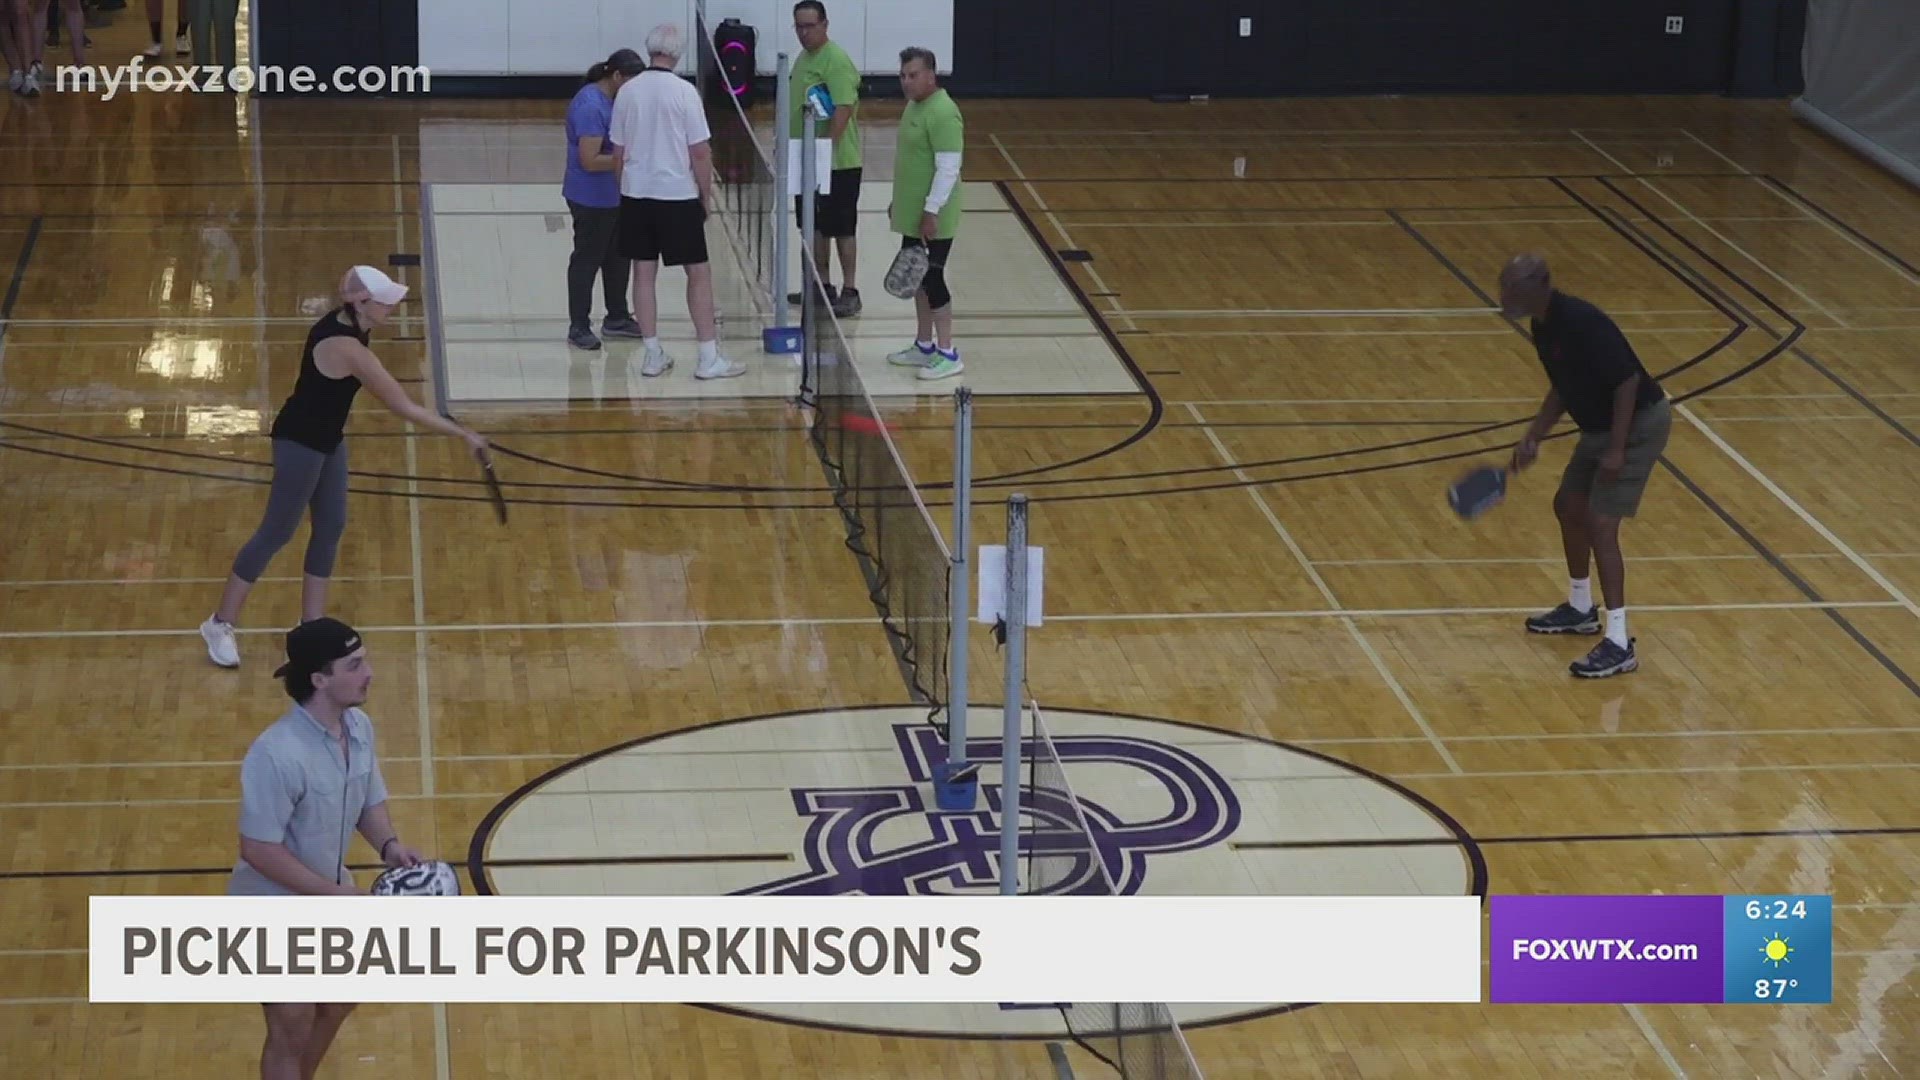 More than 80 players competed in the first annual Dr. John C. Stevens Pickleball for Parkinson’s Tournament.